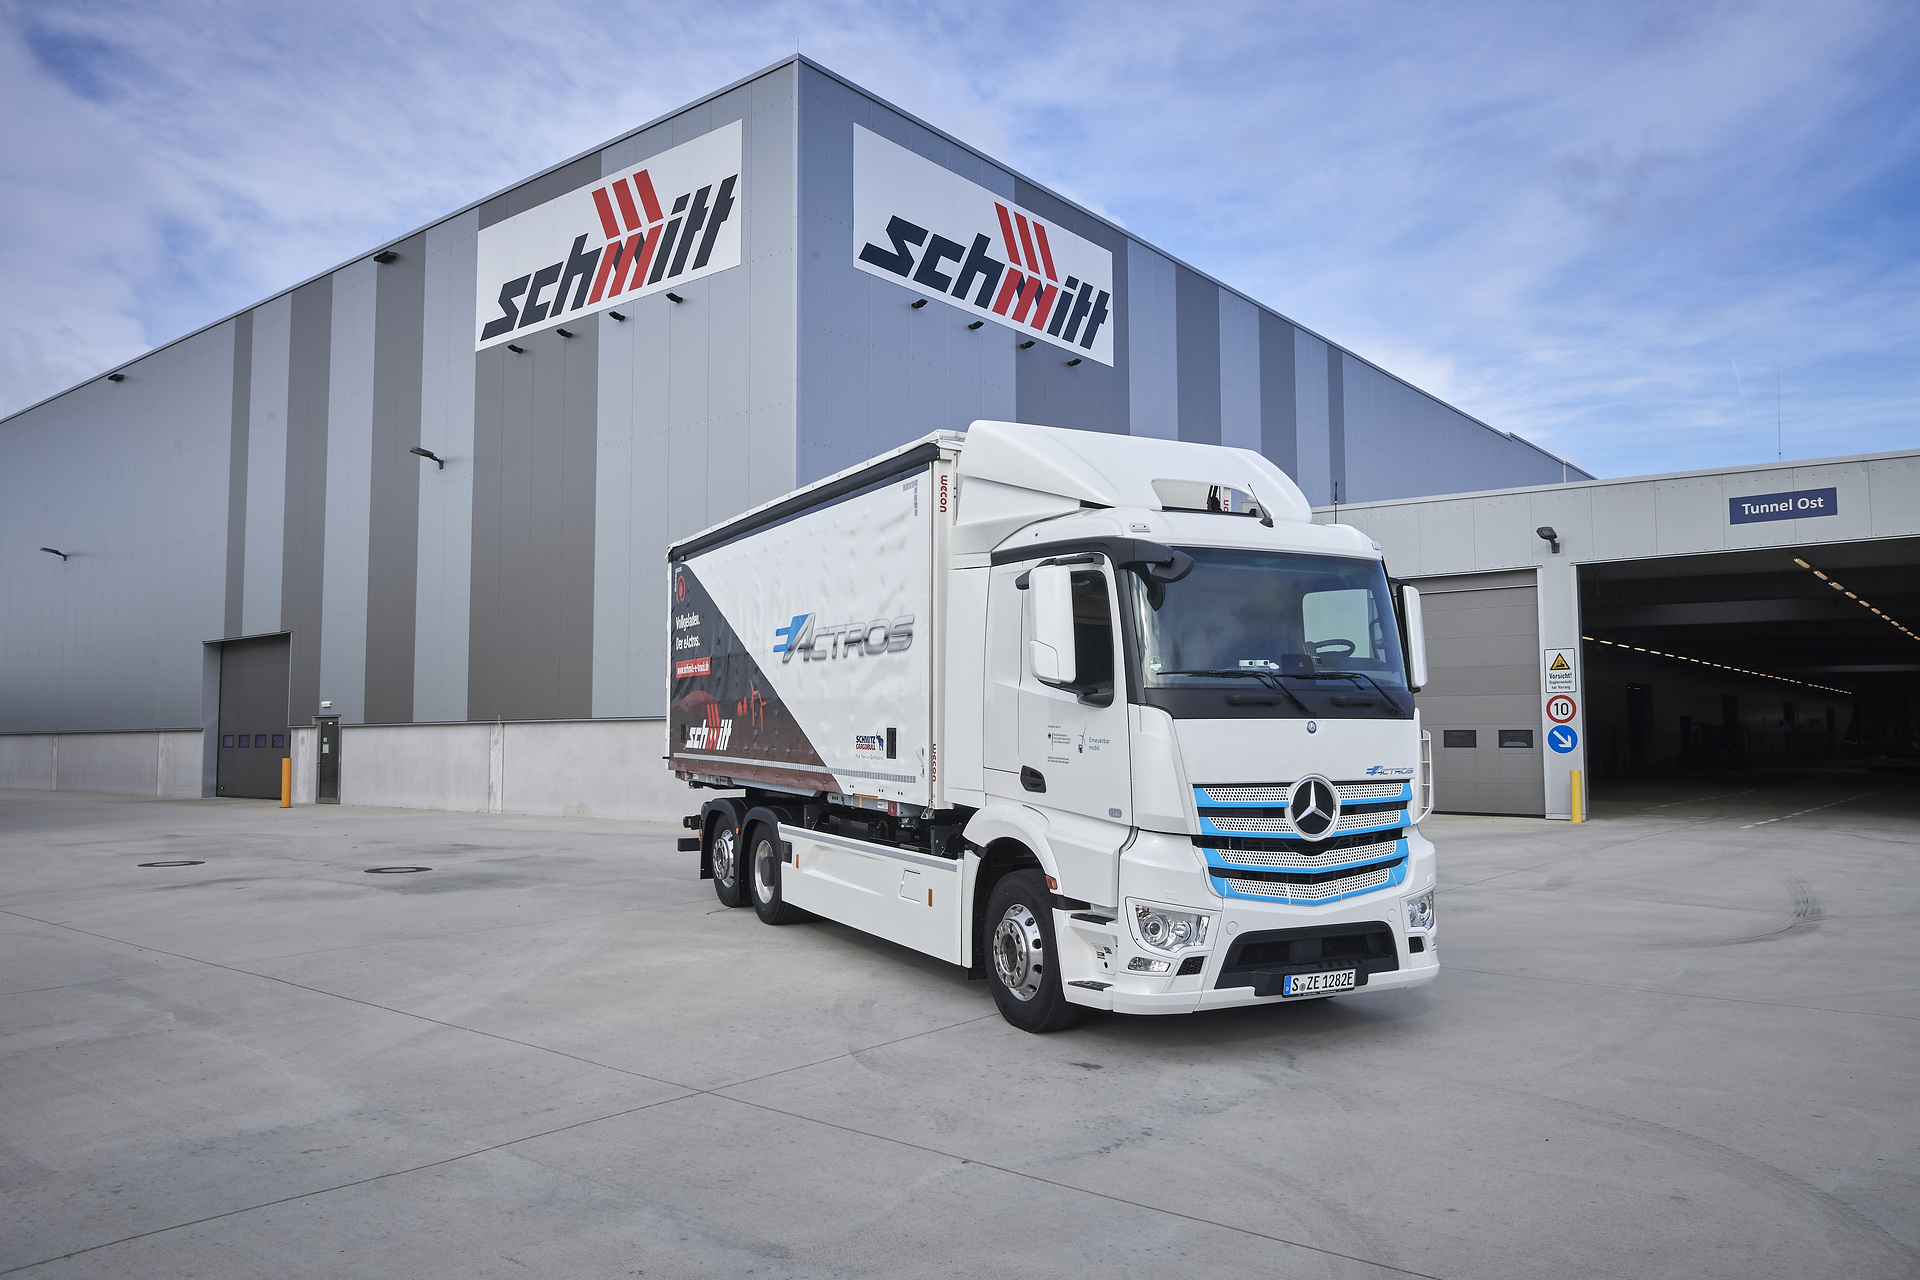 Planned comparison with catenary trucks: Since January, the battery-electric Mercedes-Benz eActros has been driving up to 300km daily on a future catenary route